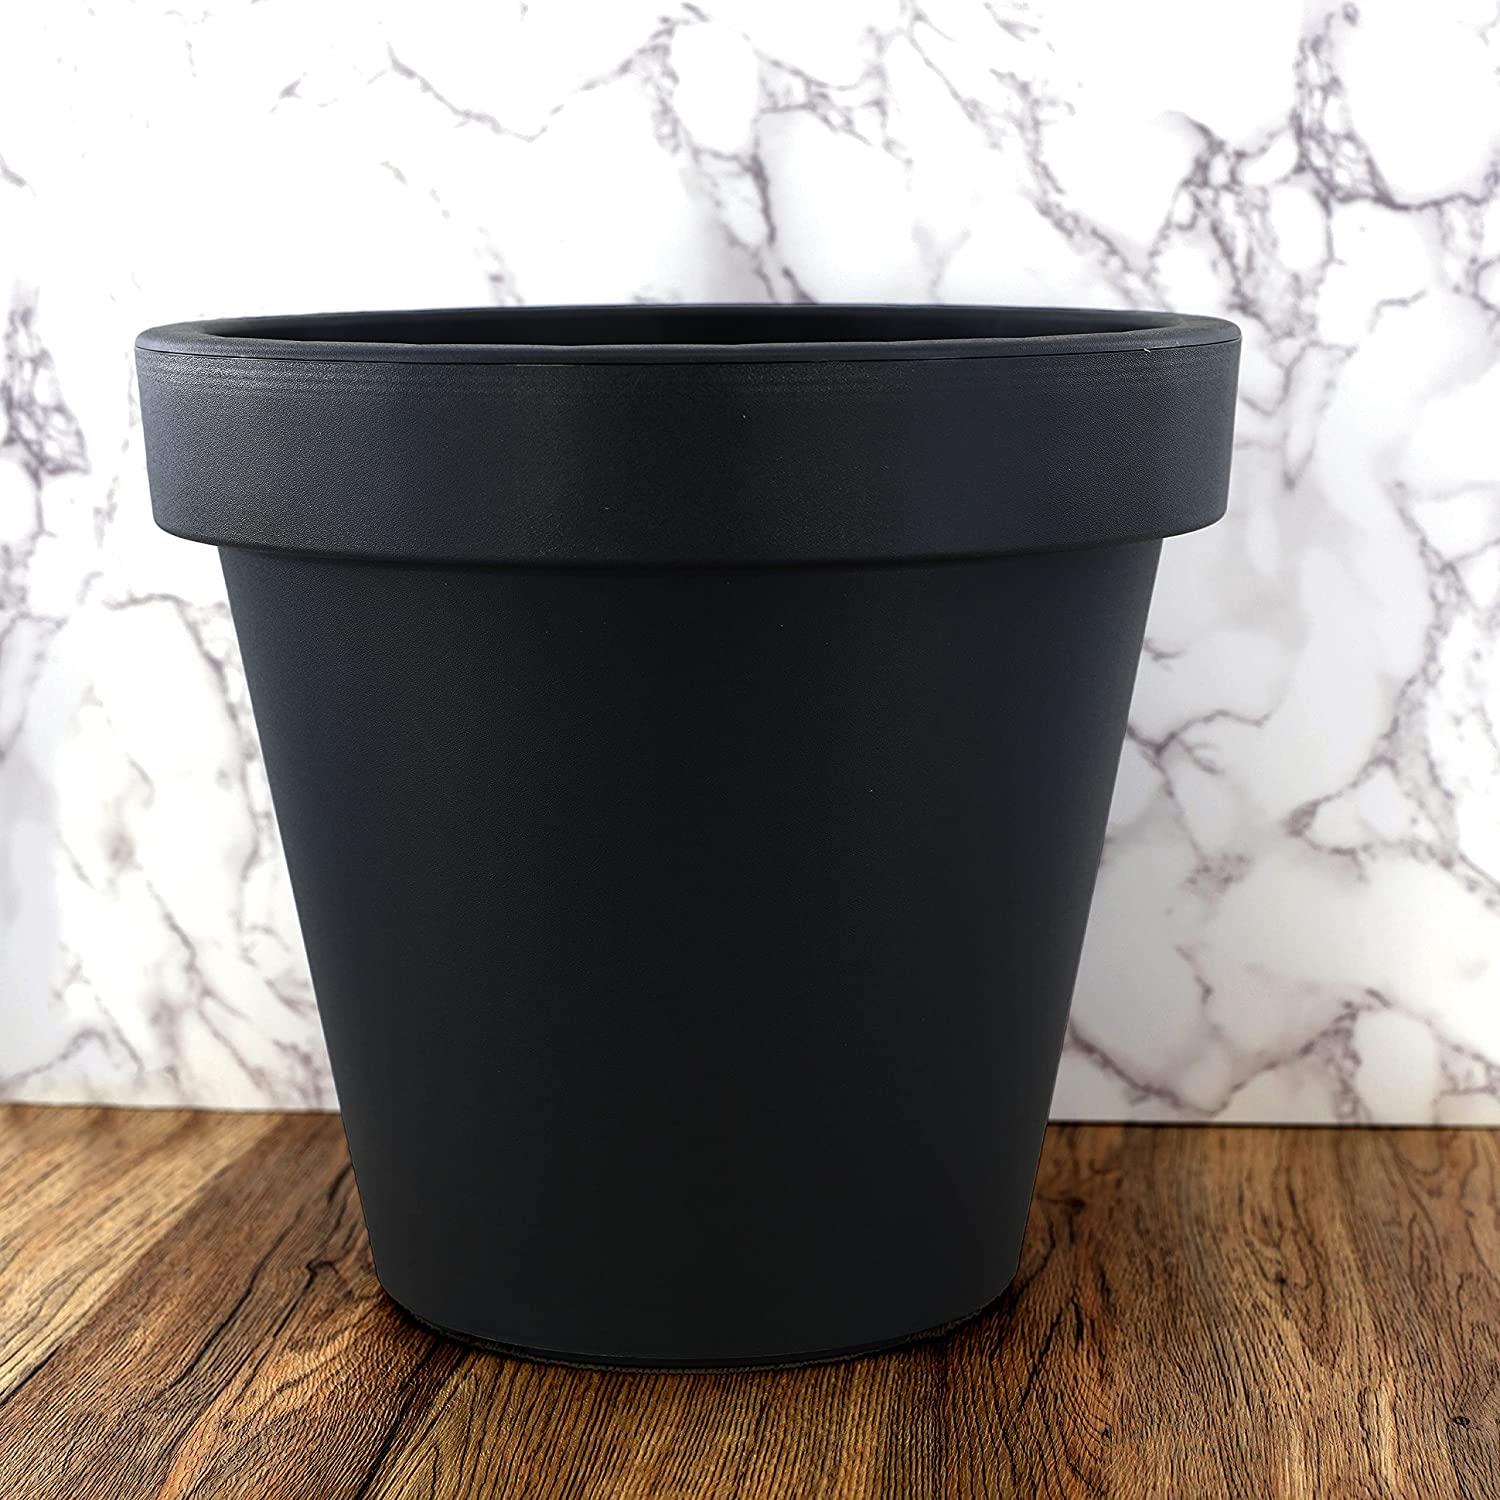 Small Round Anthracite Flower Planter 20 x 18 cm by Geezy - UKBuyZone